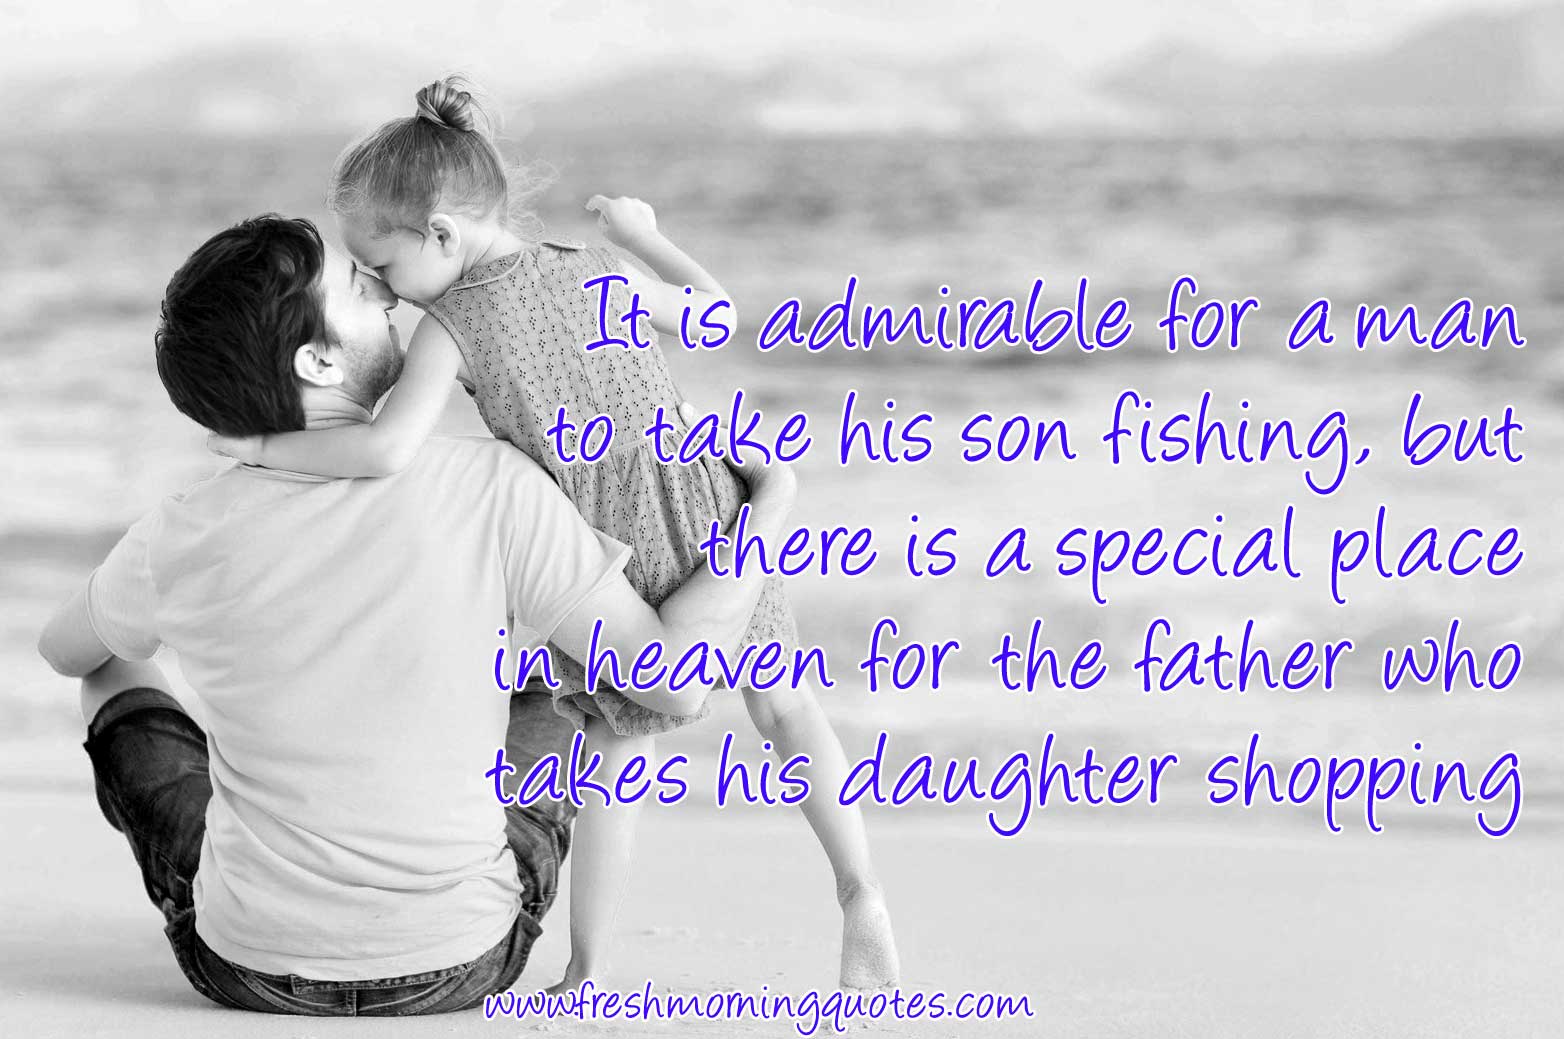 50 Sweetest Father Daughter Quotes With Images - Heart Touching Quotes For Daughter , HD Wallpaper & Backgrounds